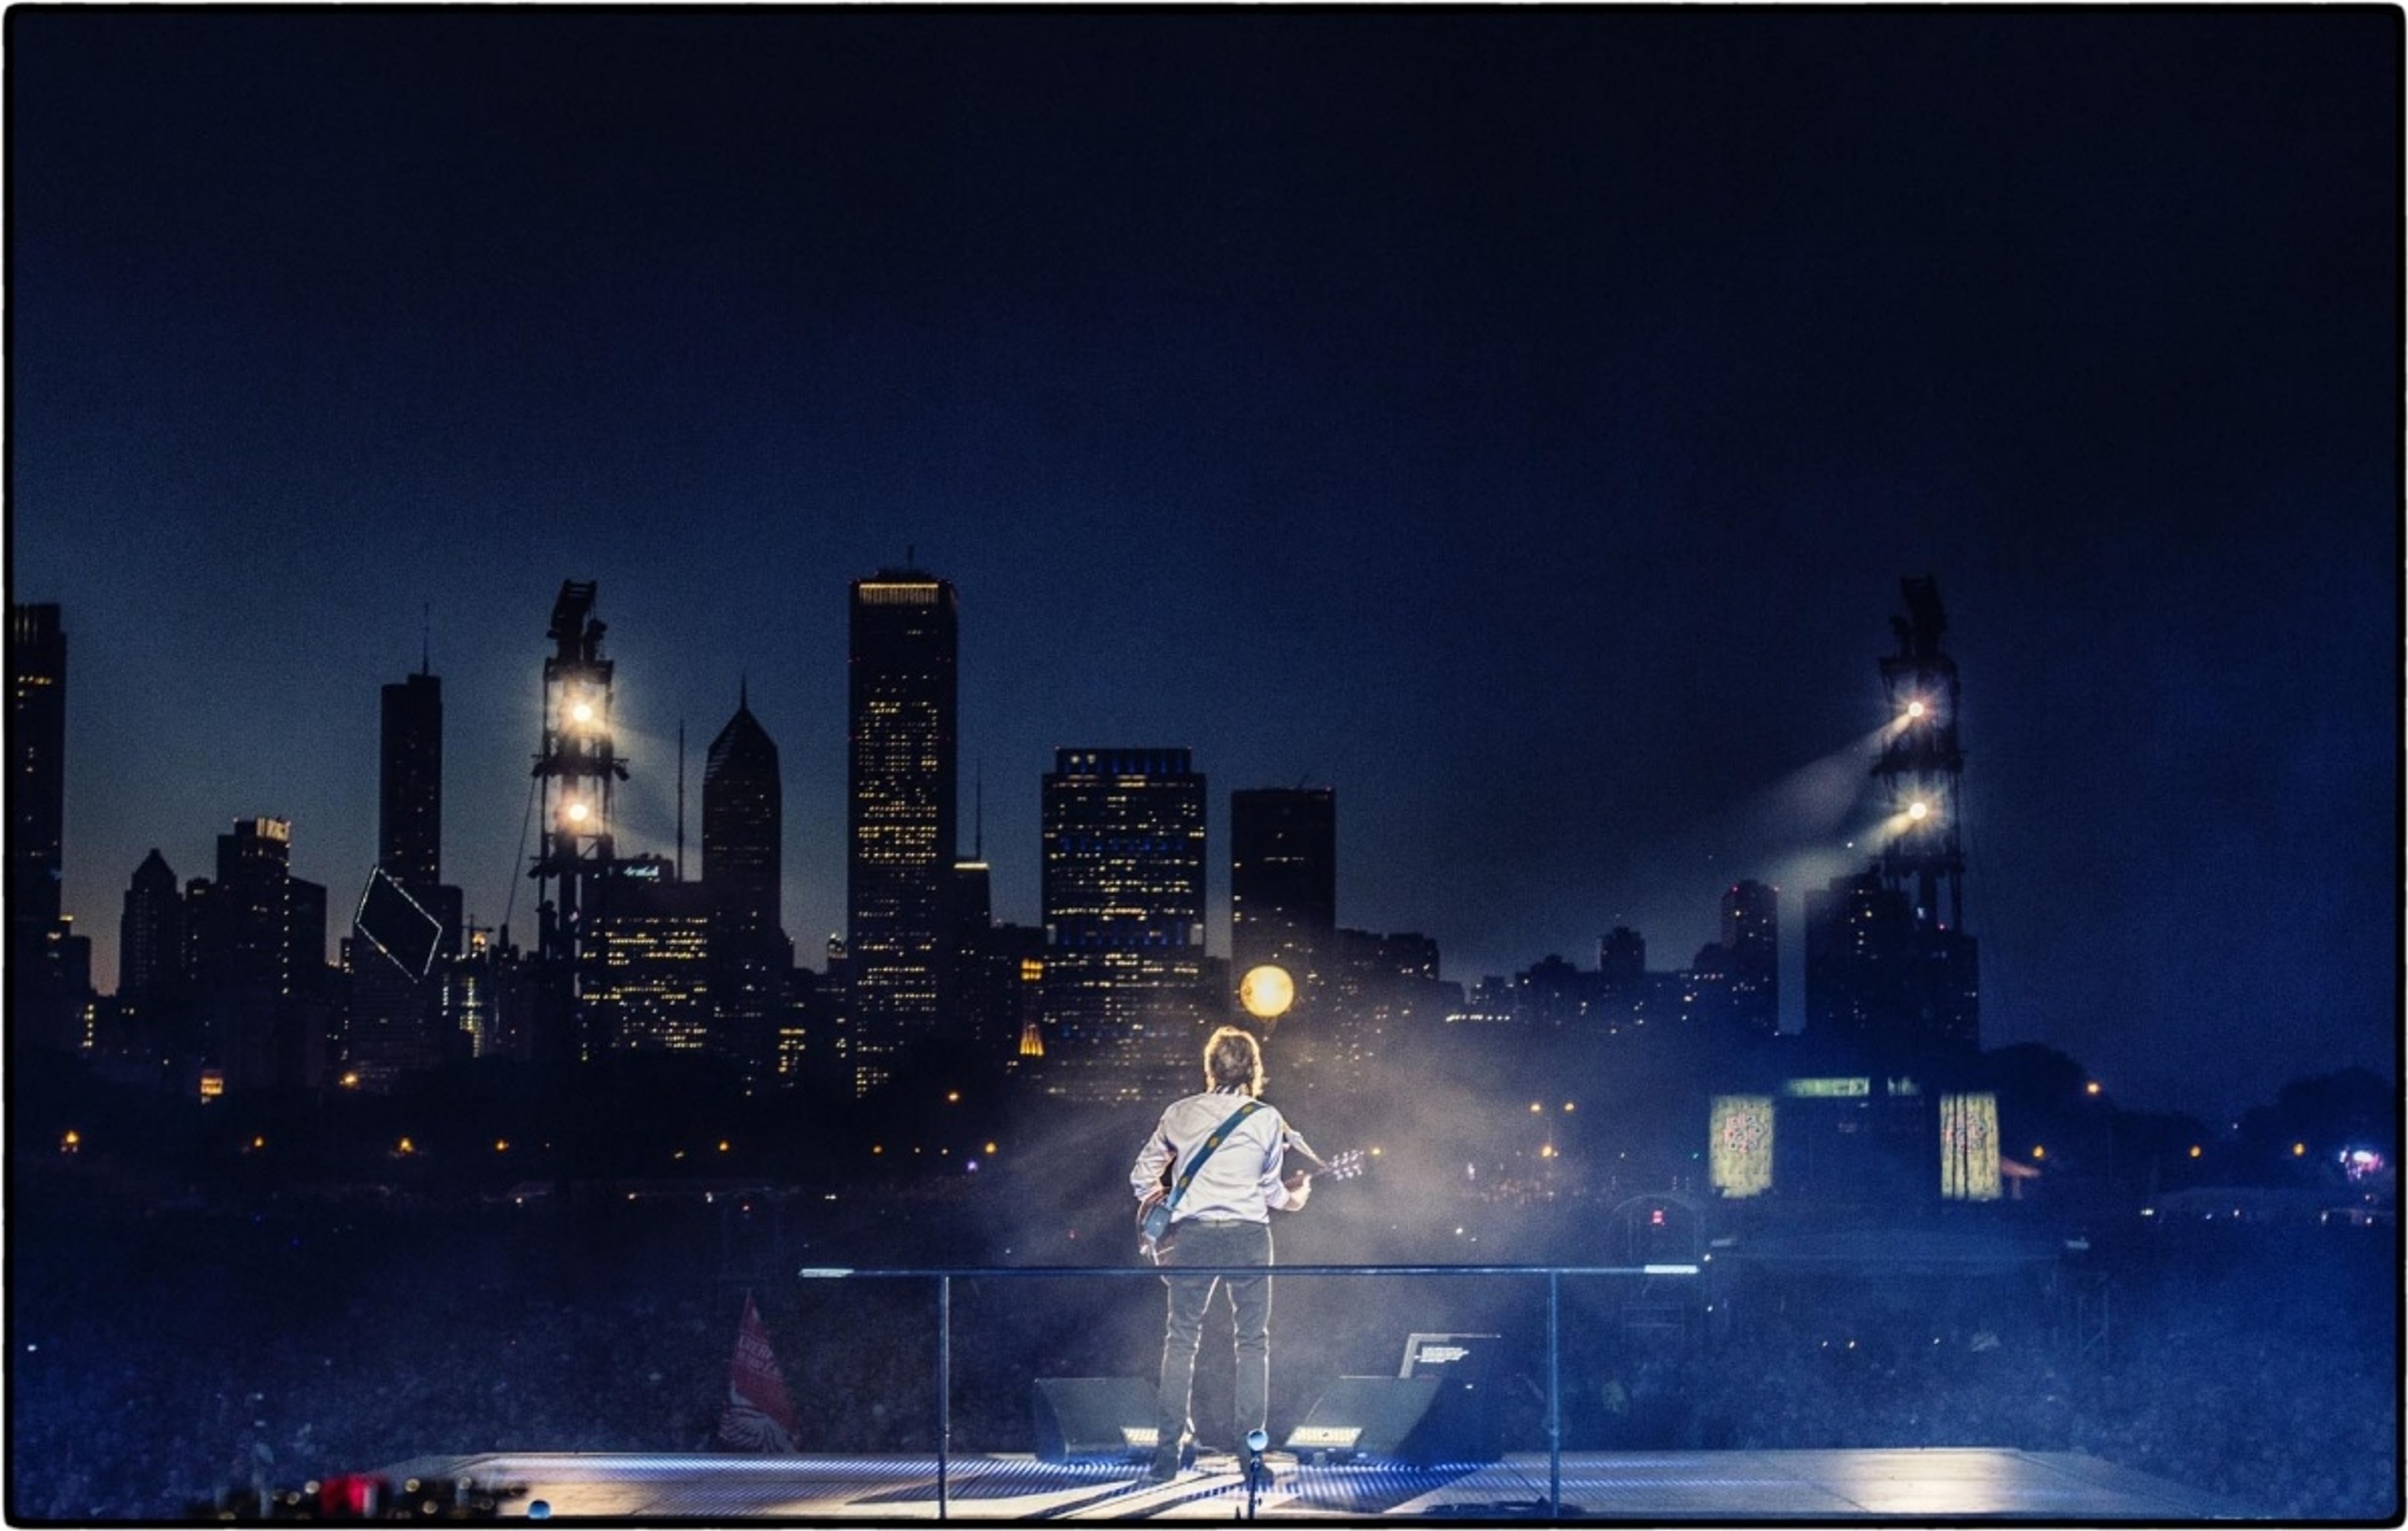 Paul performing at Lollapalooza Festival, Grant Park, Chicago - 31st July 2015